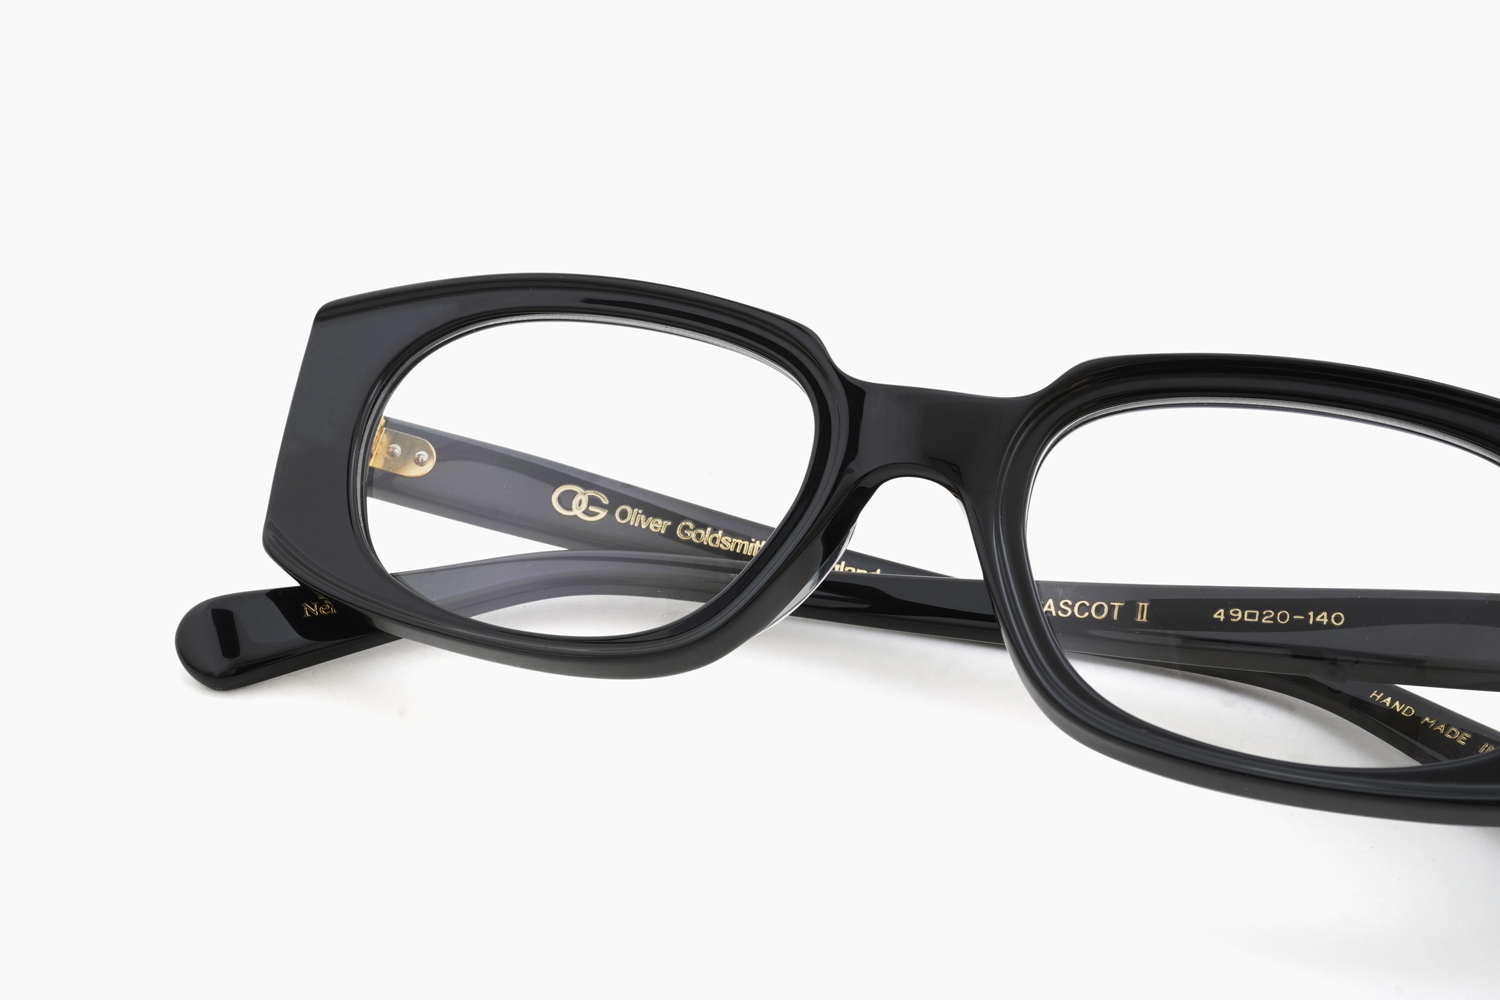 OLIVER GOLDSMITH｜The Royal Collection｜ASCOT Ⅱ - Nero｜PRODUCT